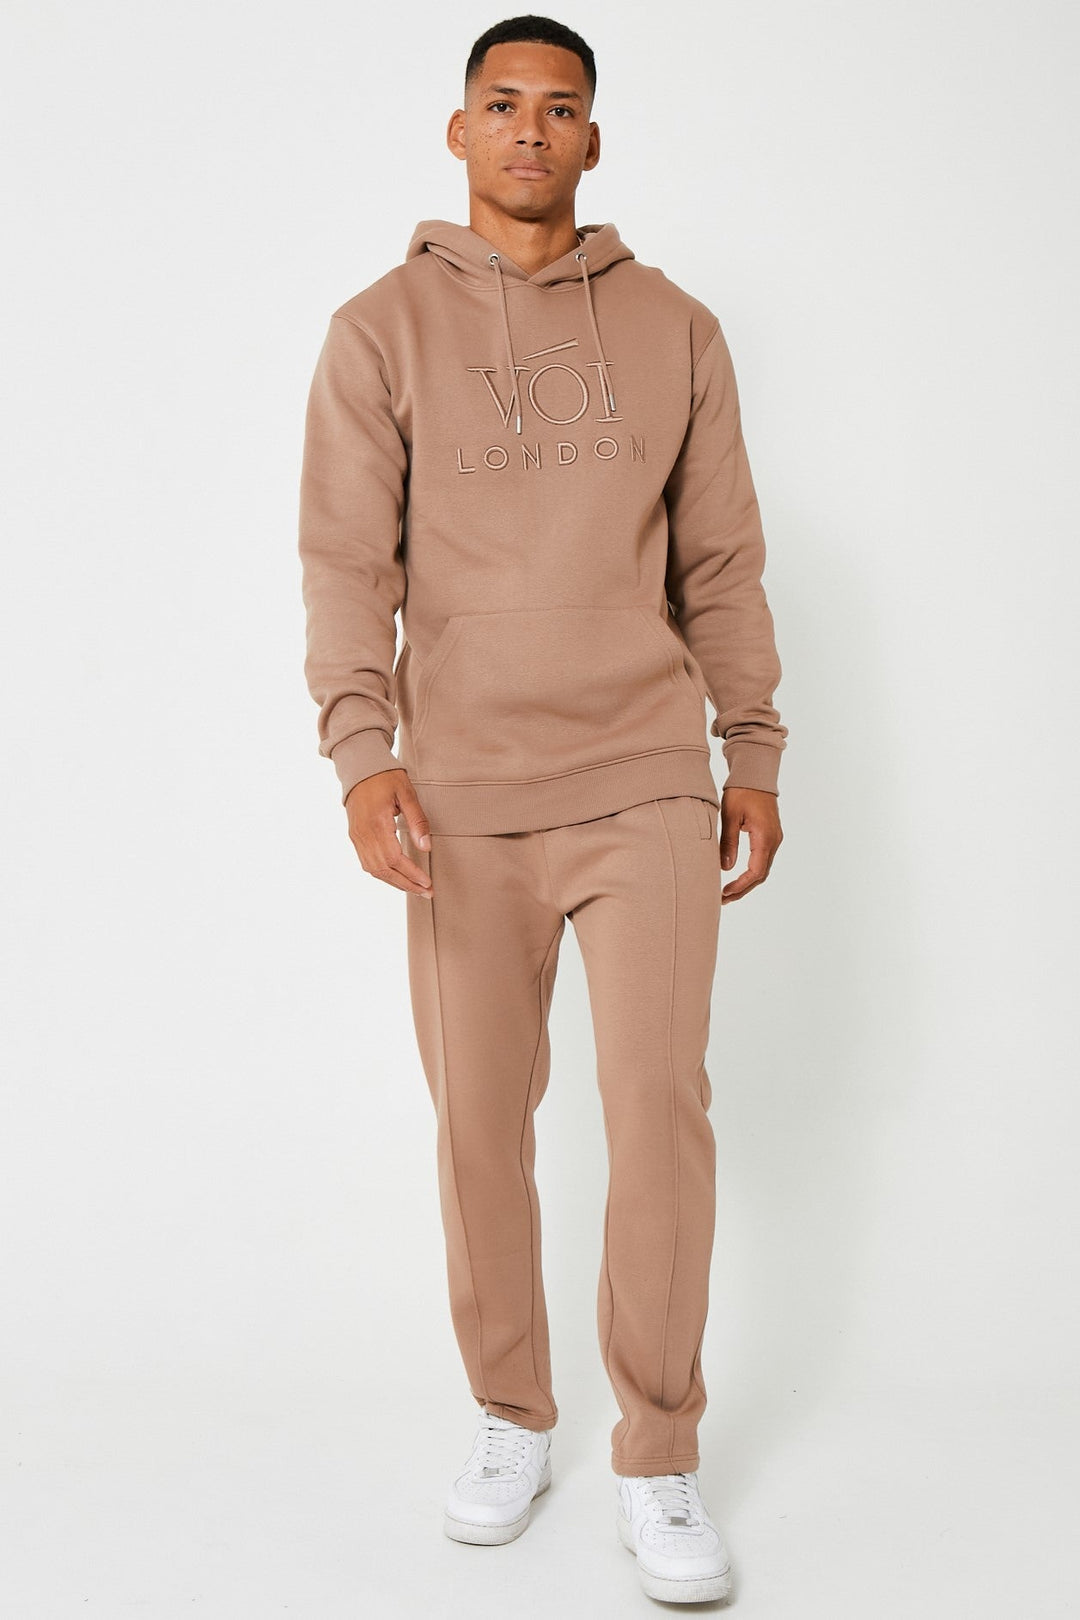 Holloway Road Over the Head Hoody Tracksuit - Brown